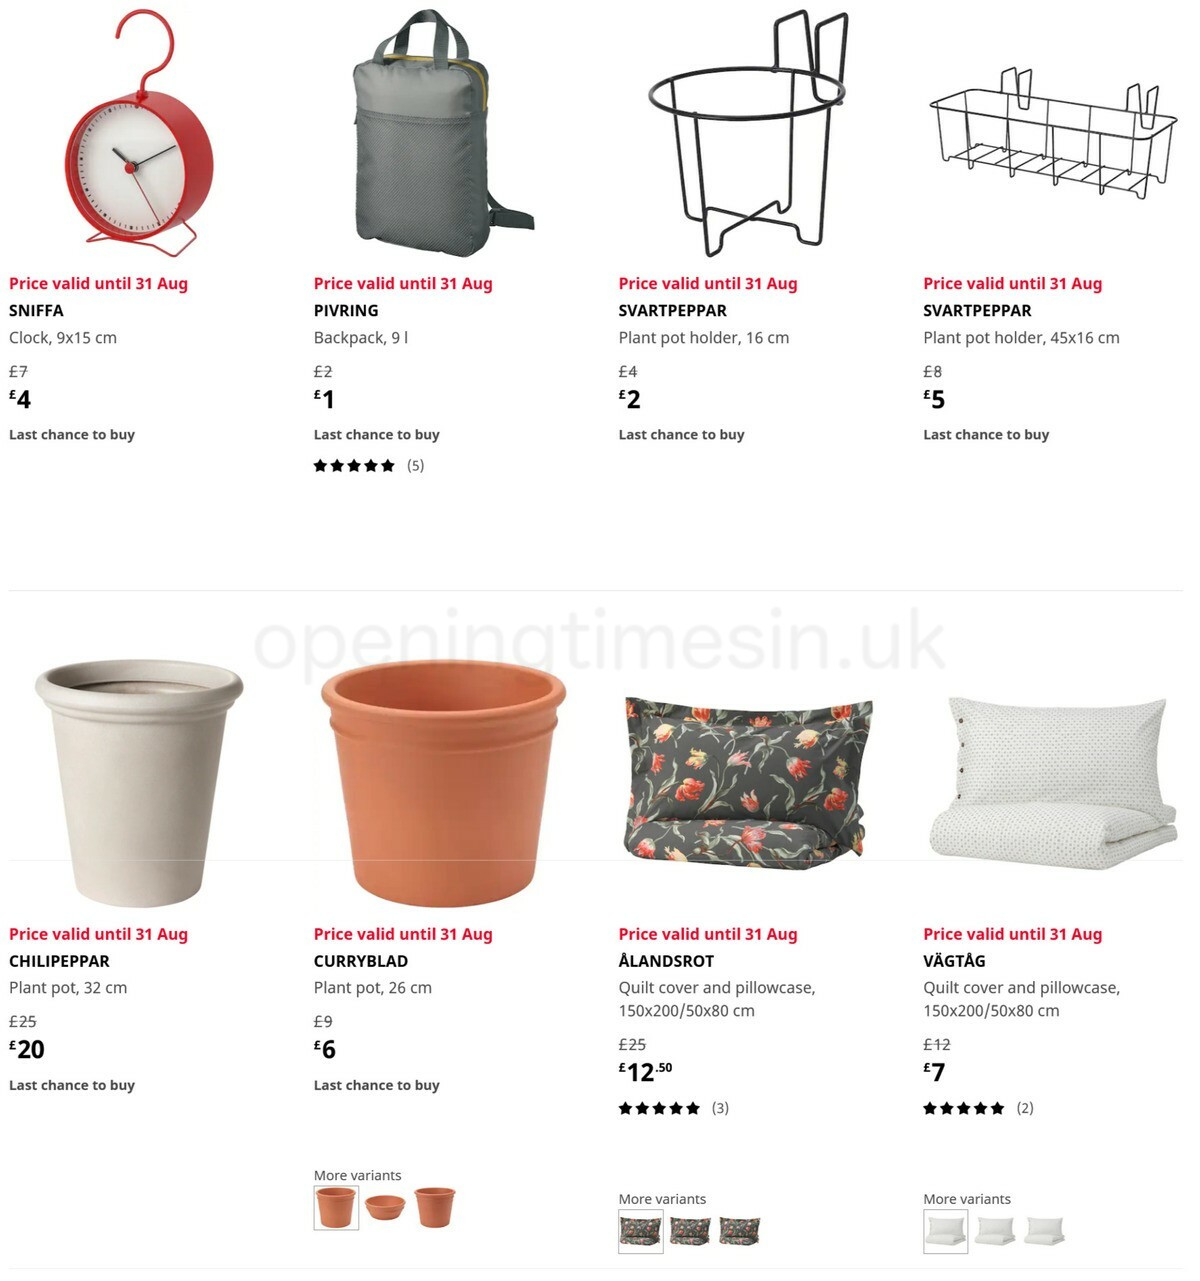 IKEA Offers from 8 June